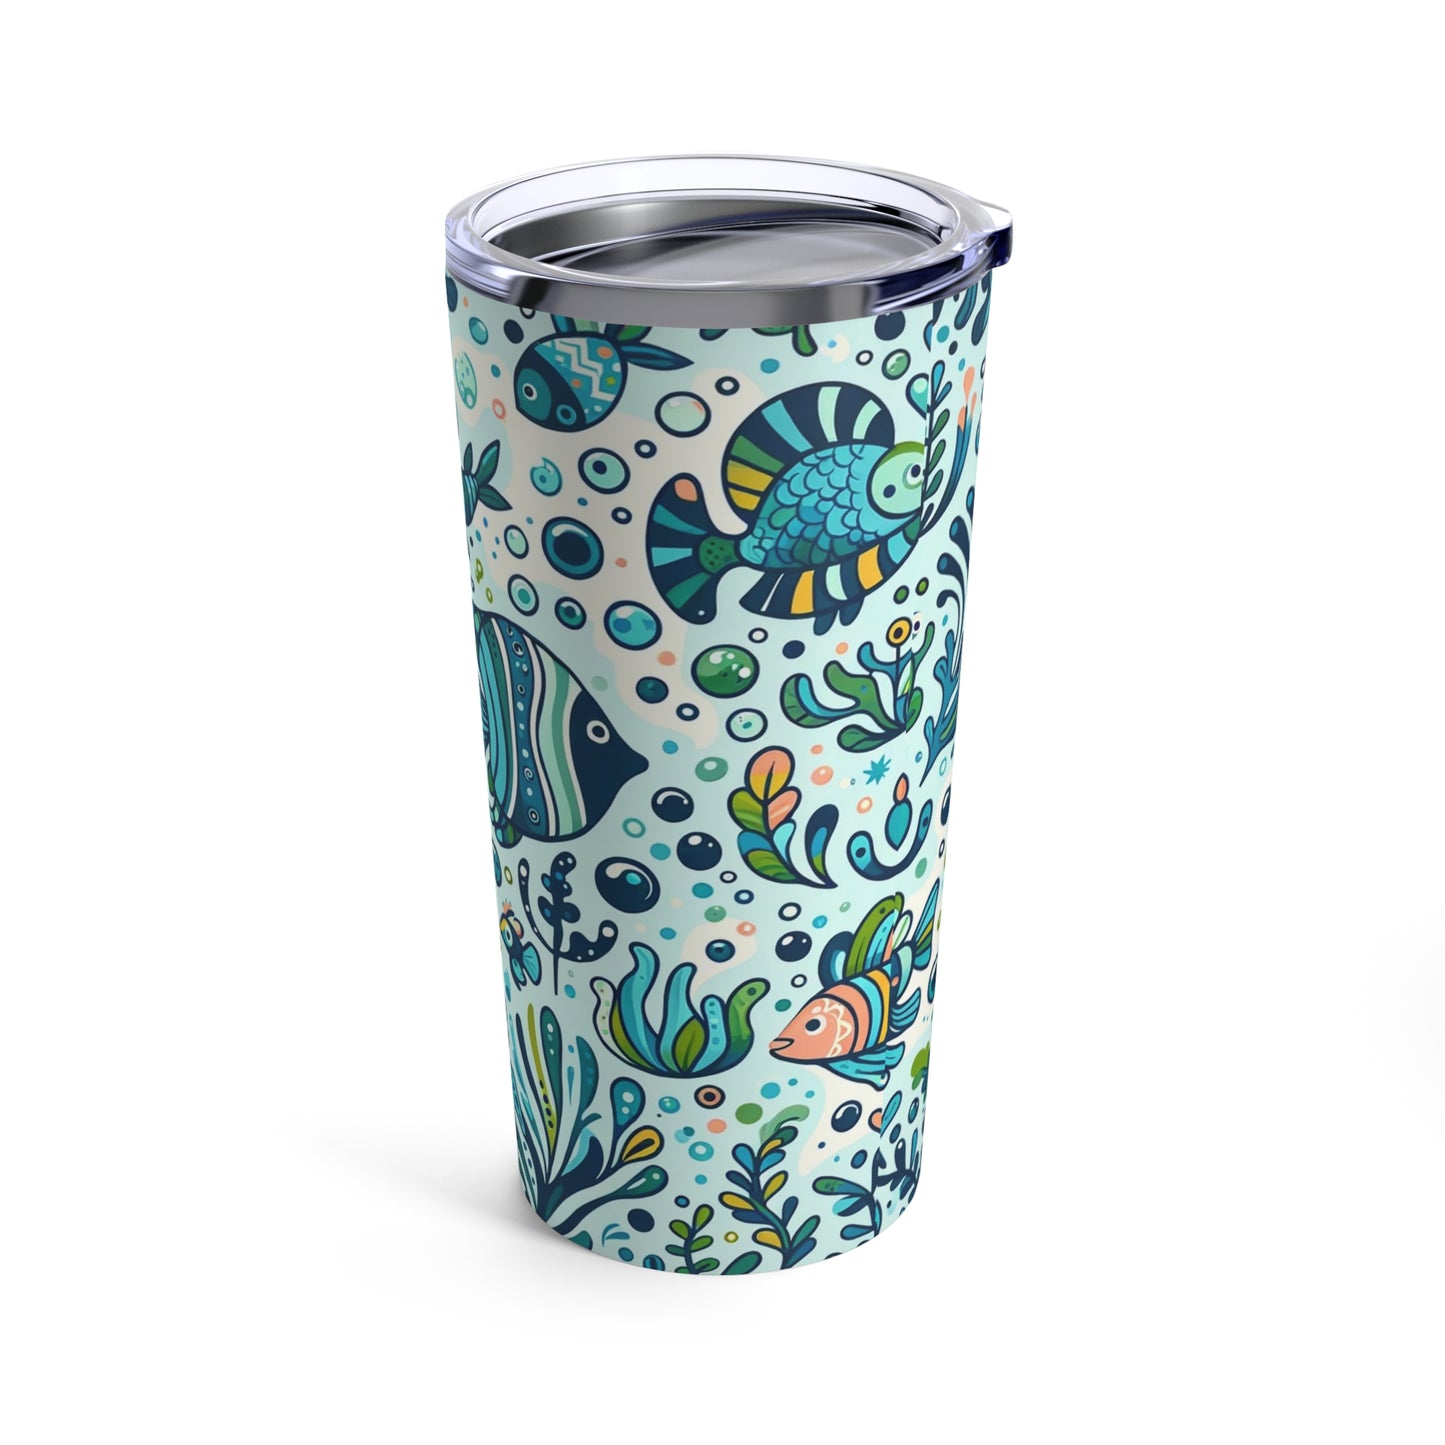 Whimsical Underwater 20oz Tumbler - Playful Ocean Life Design, Colorful and Fun